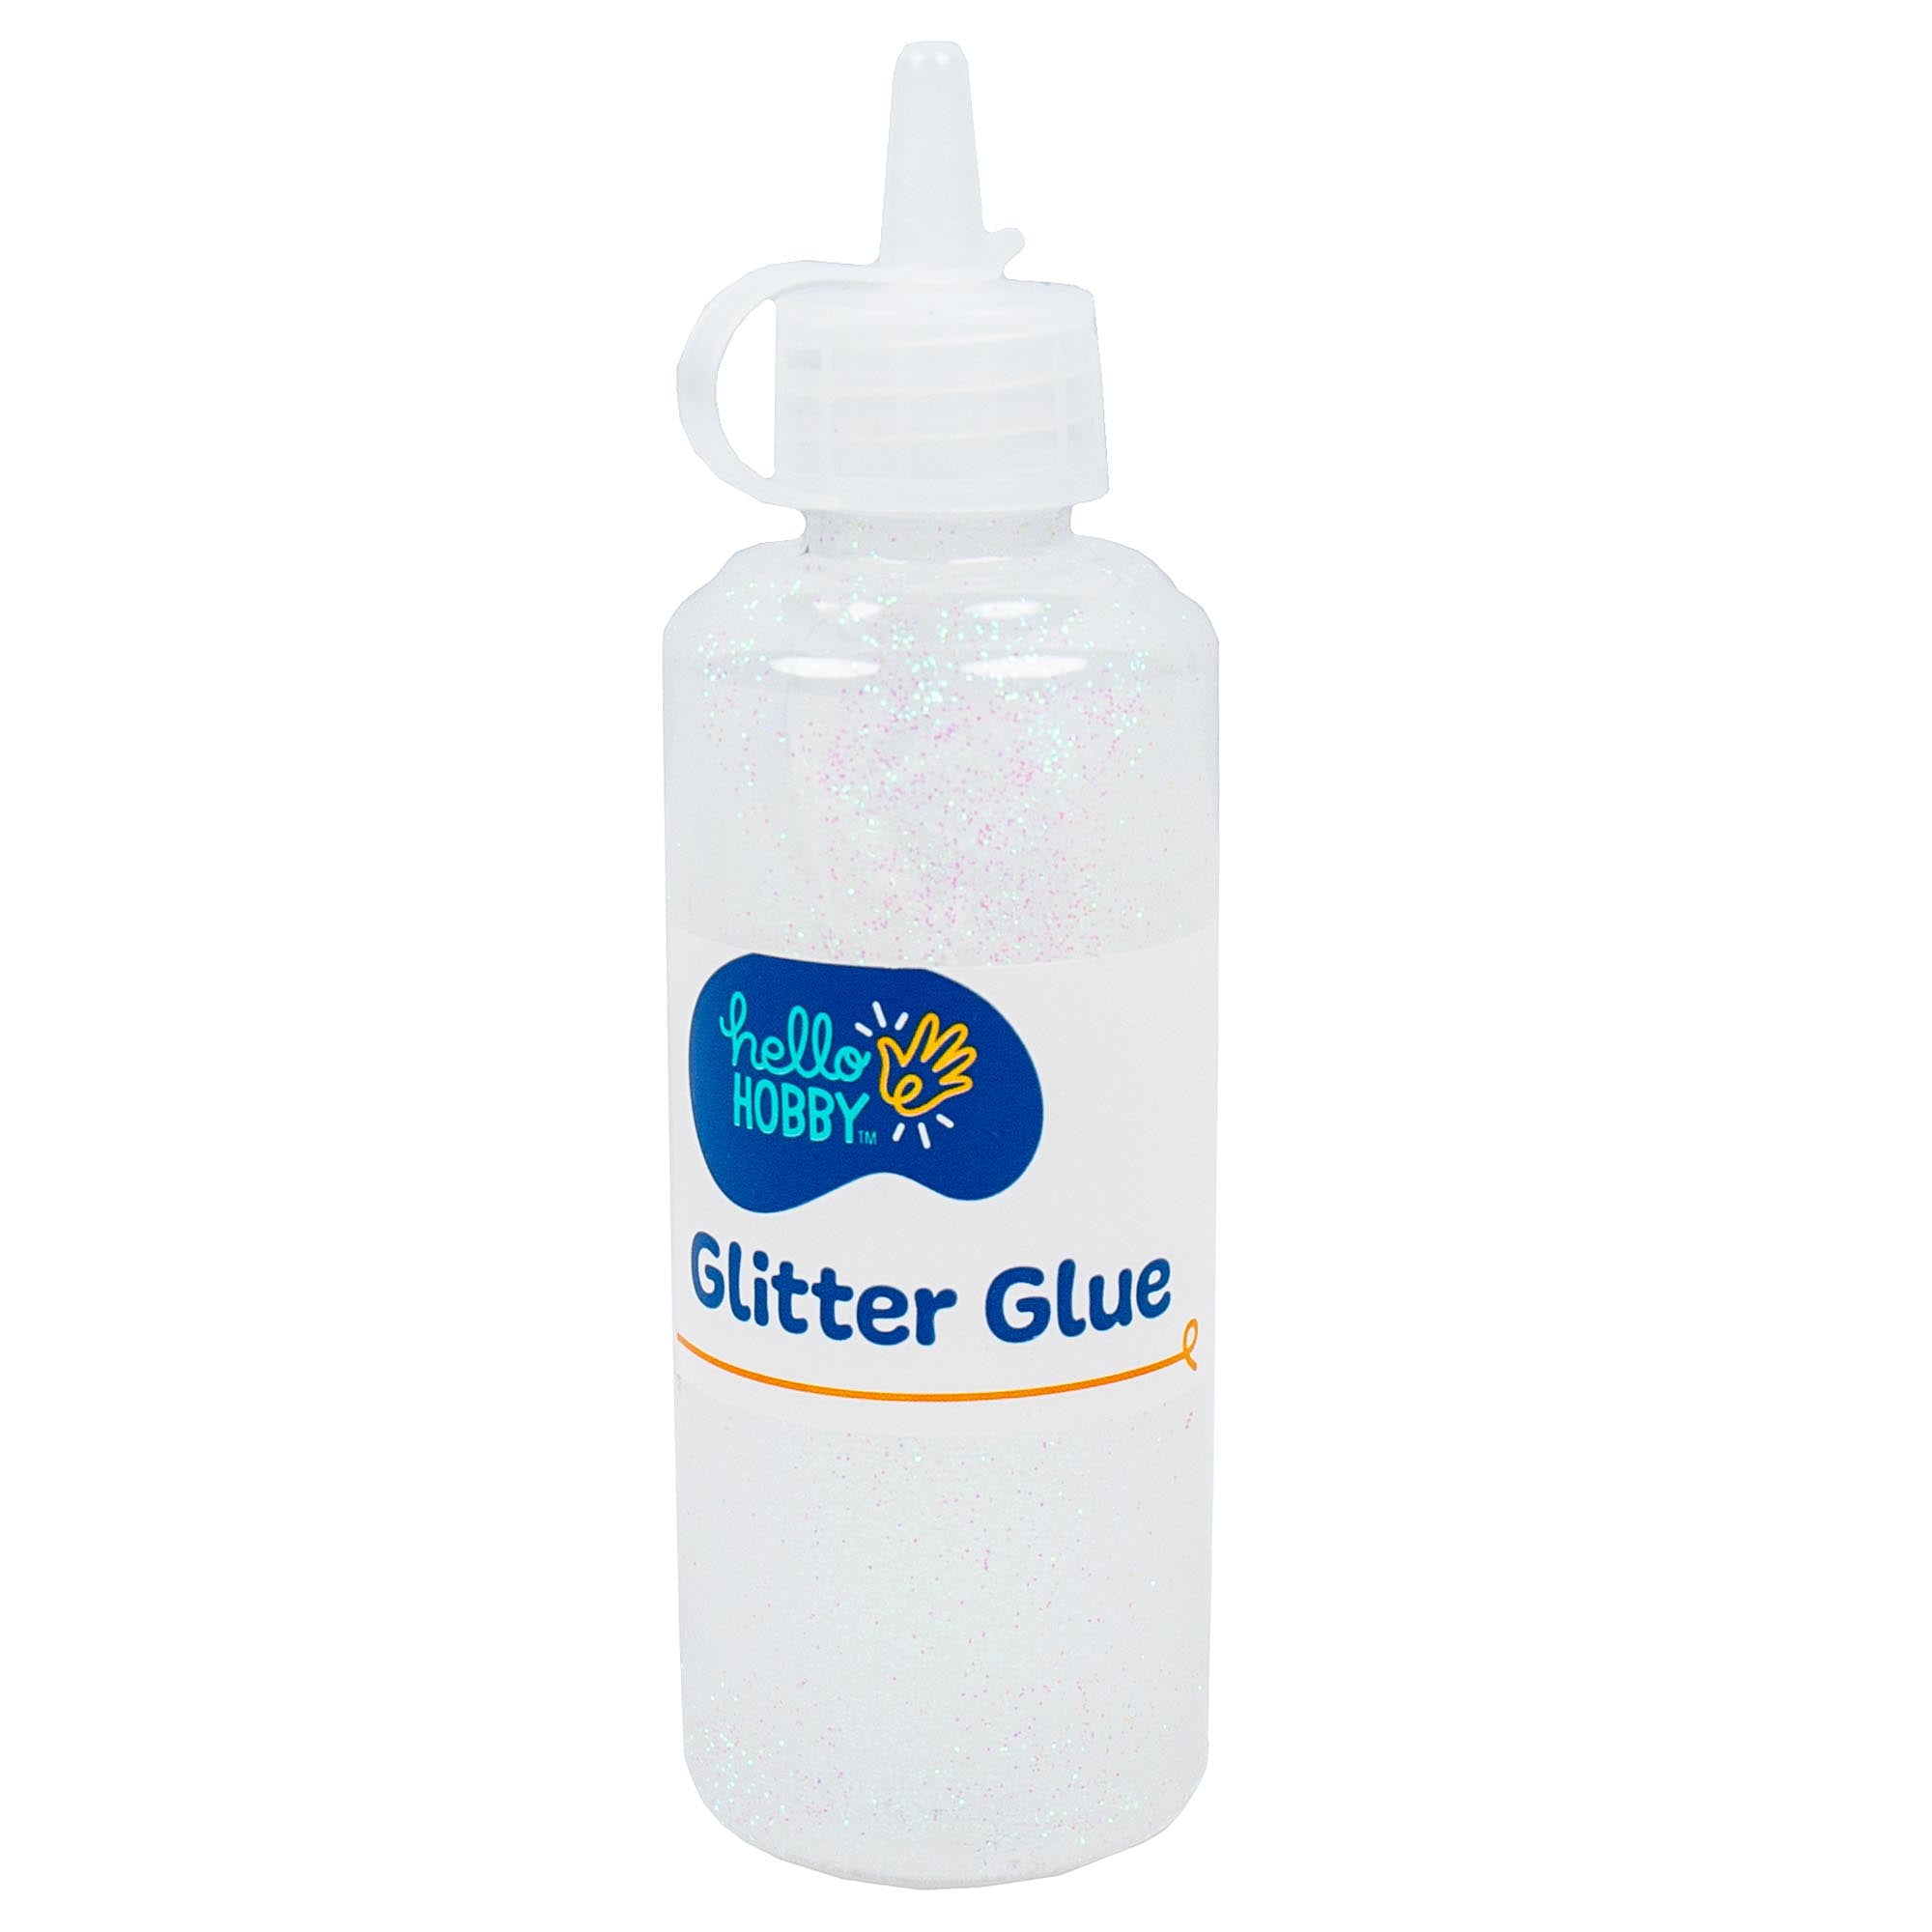 Art Glitter Glue - Fabric Dries Clear Adhesive - 4 oz Bottle / with Tip